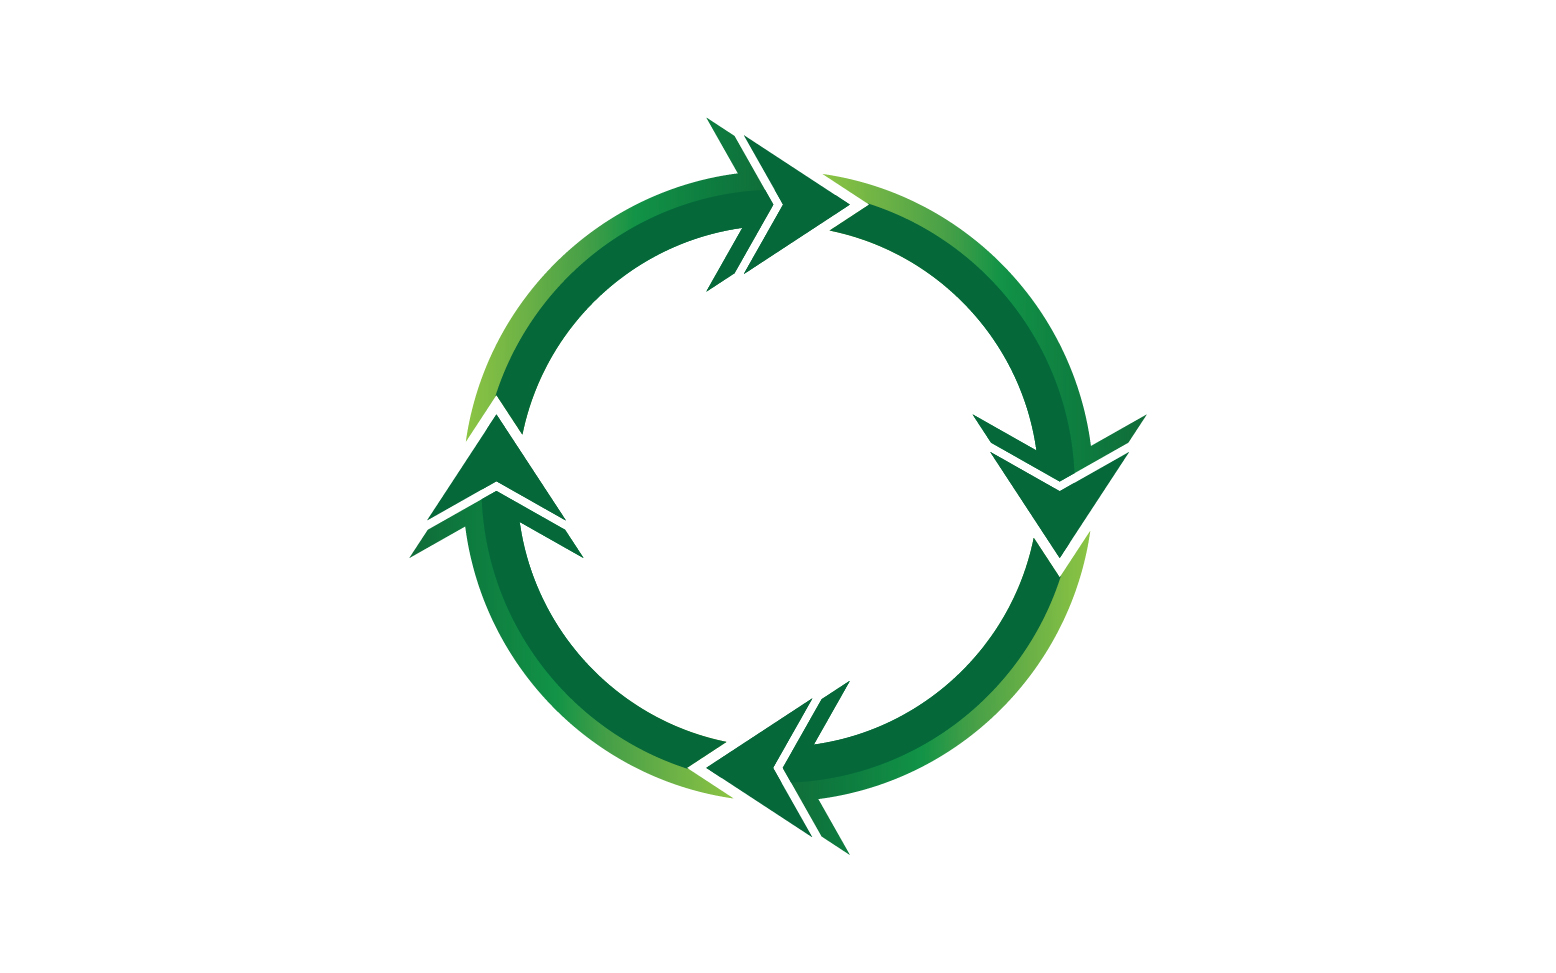 Recycle Symbol isolated on a white background v7